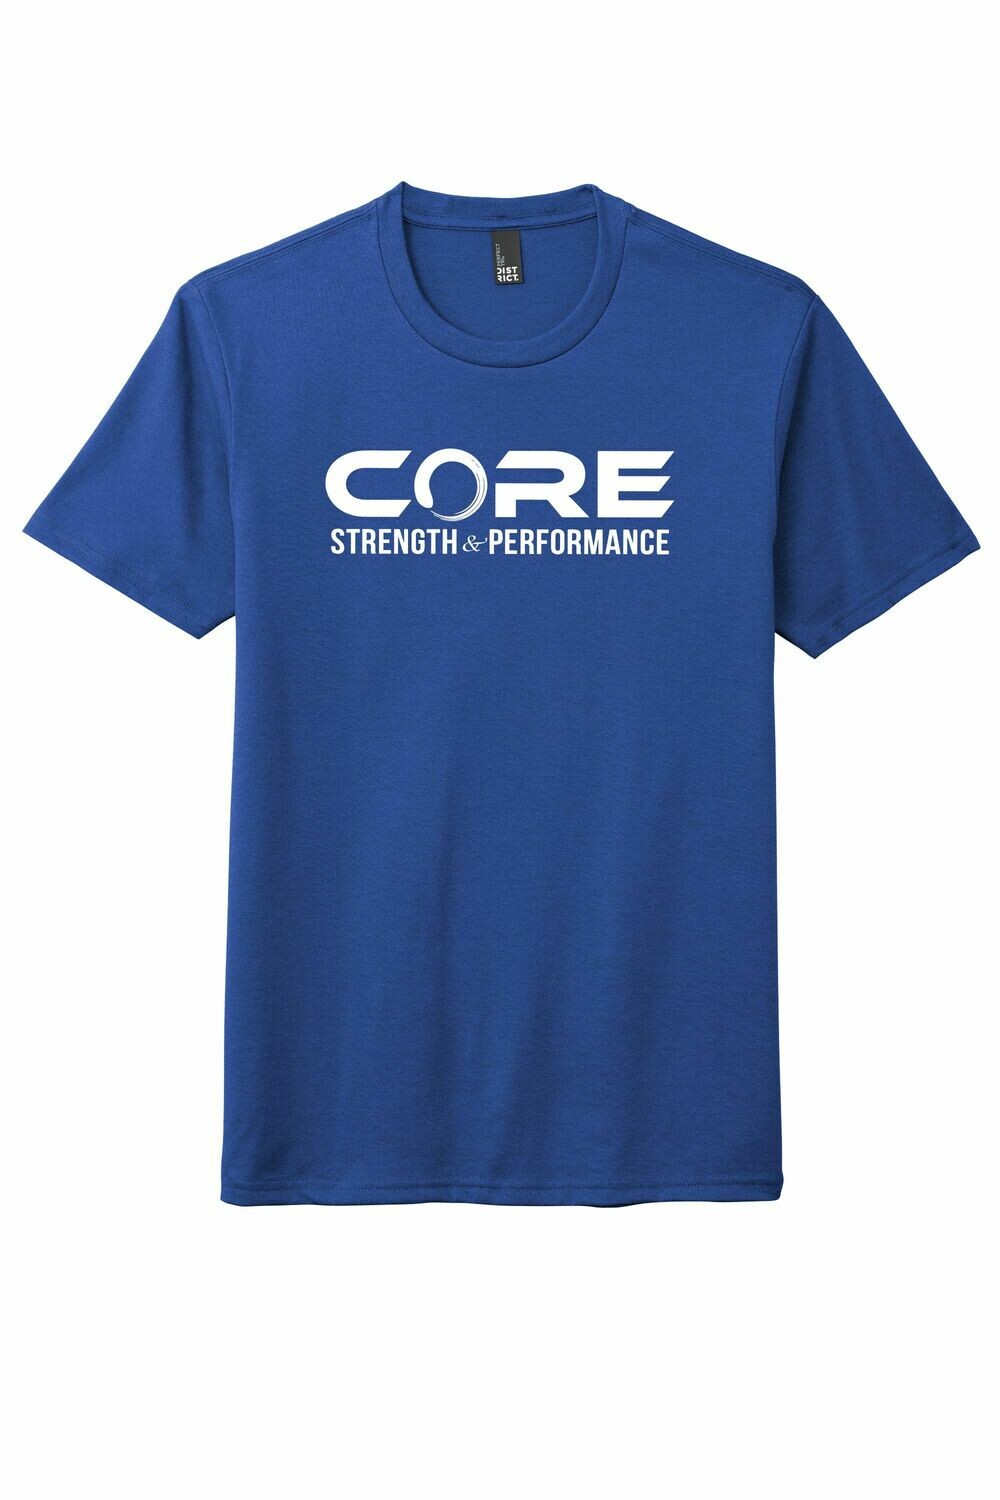 Core S + P Adult Soft Tee